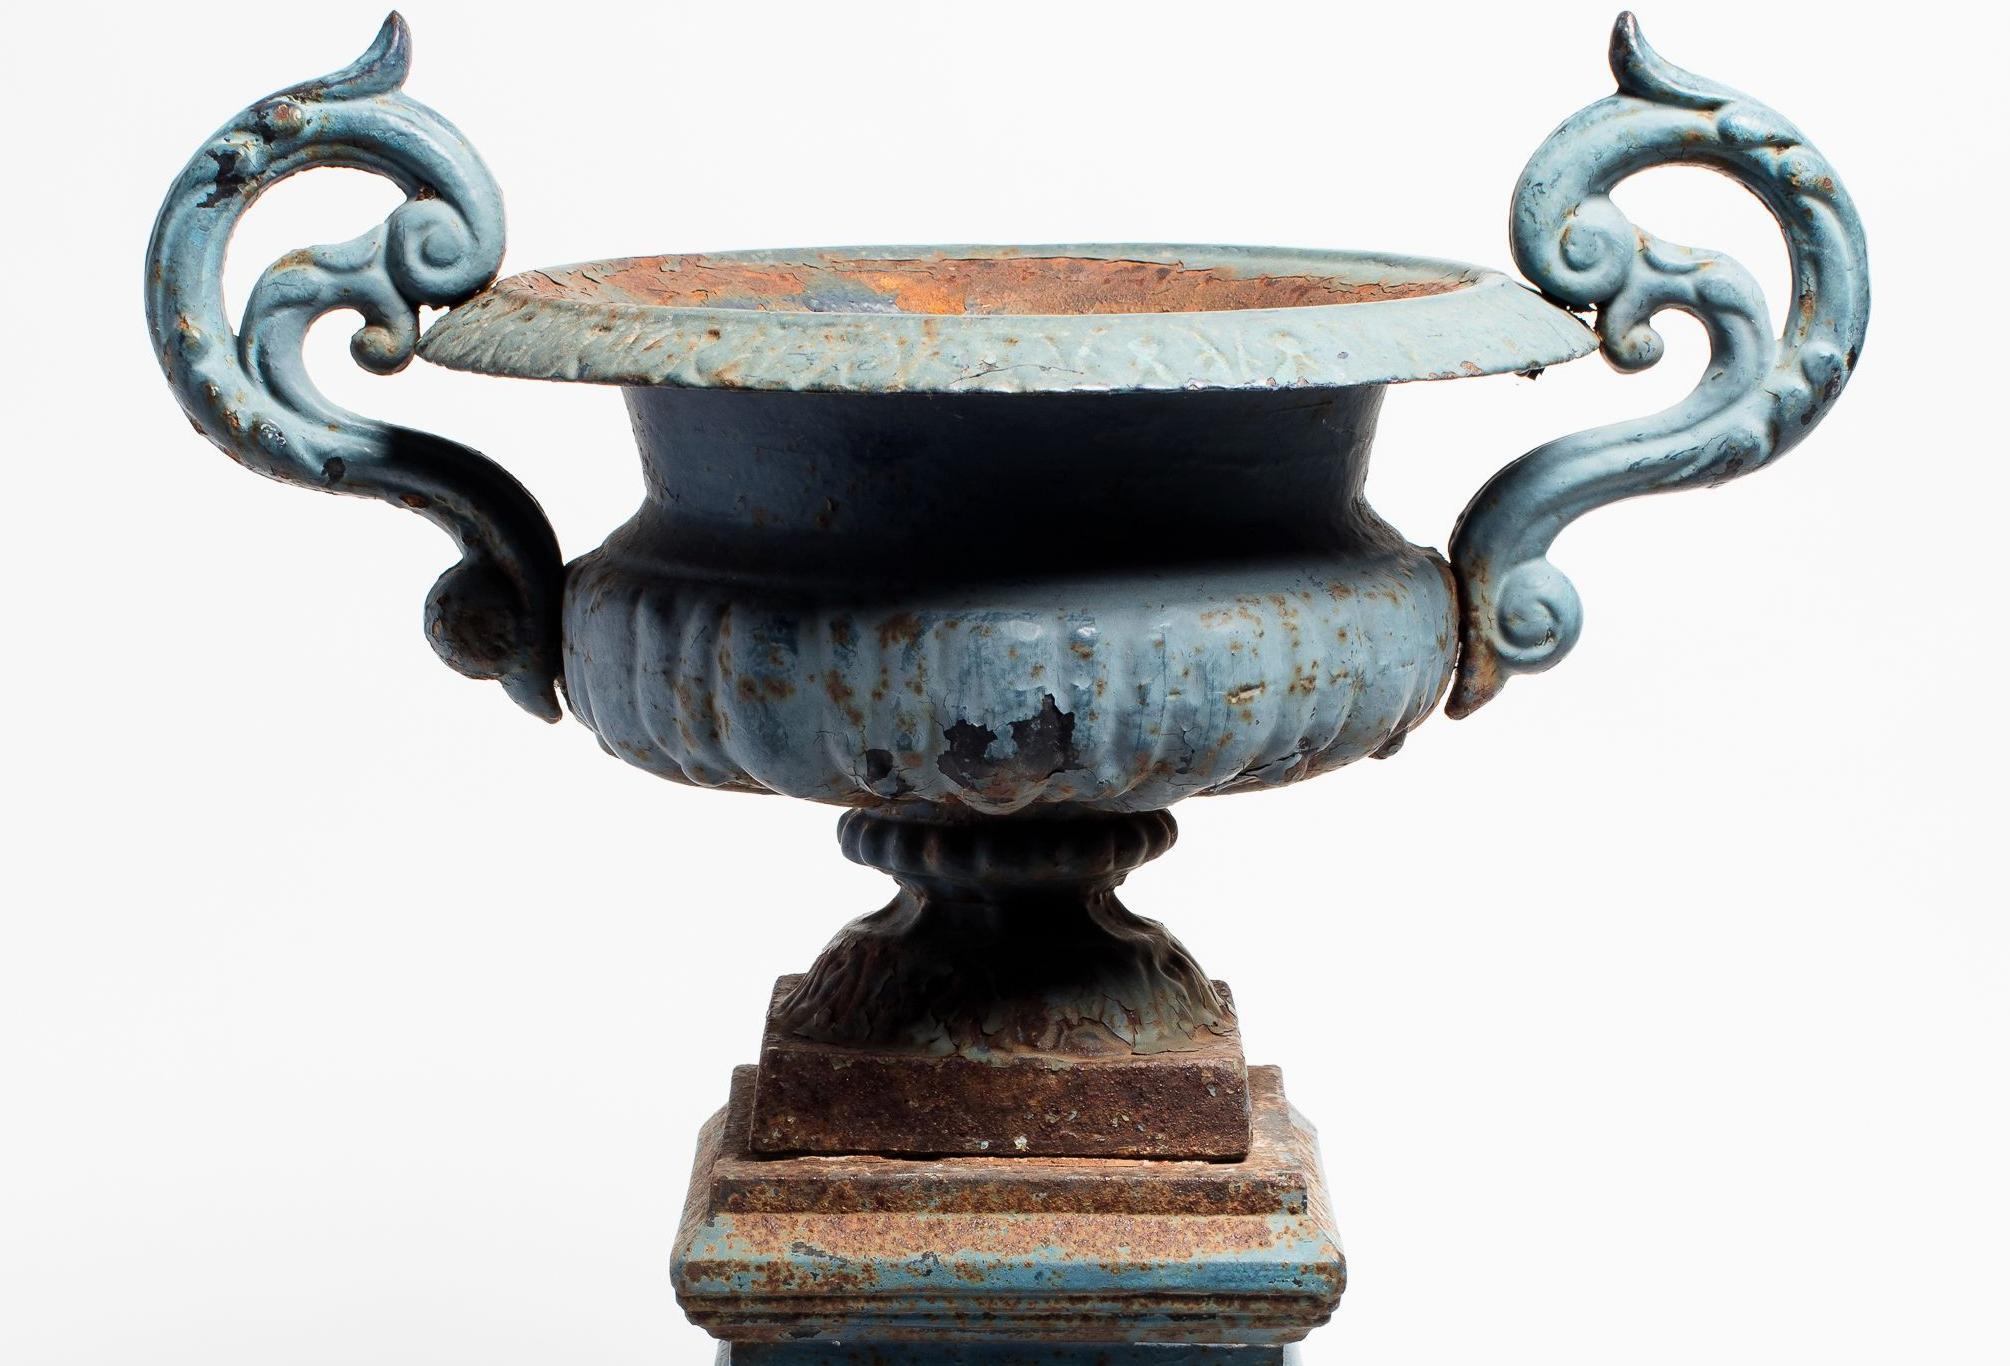 Neoclassical cast iron pedestal urn on plinth base, made in France circa 1880. Striking blue enamel finish with a patina from age and weathering. This traditional garden element is ideal for elevating greenery for a beautiful landscape. Discovered